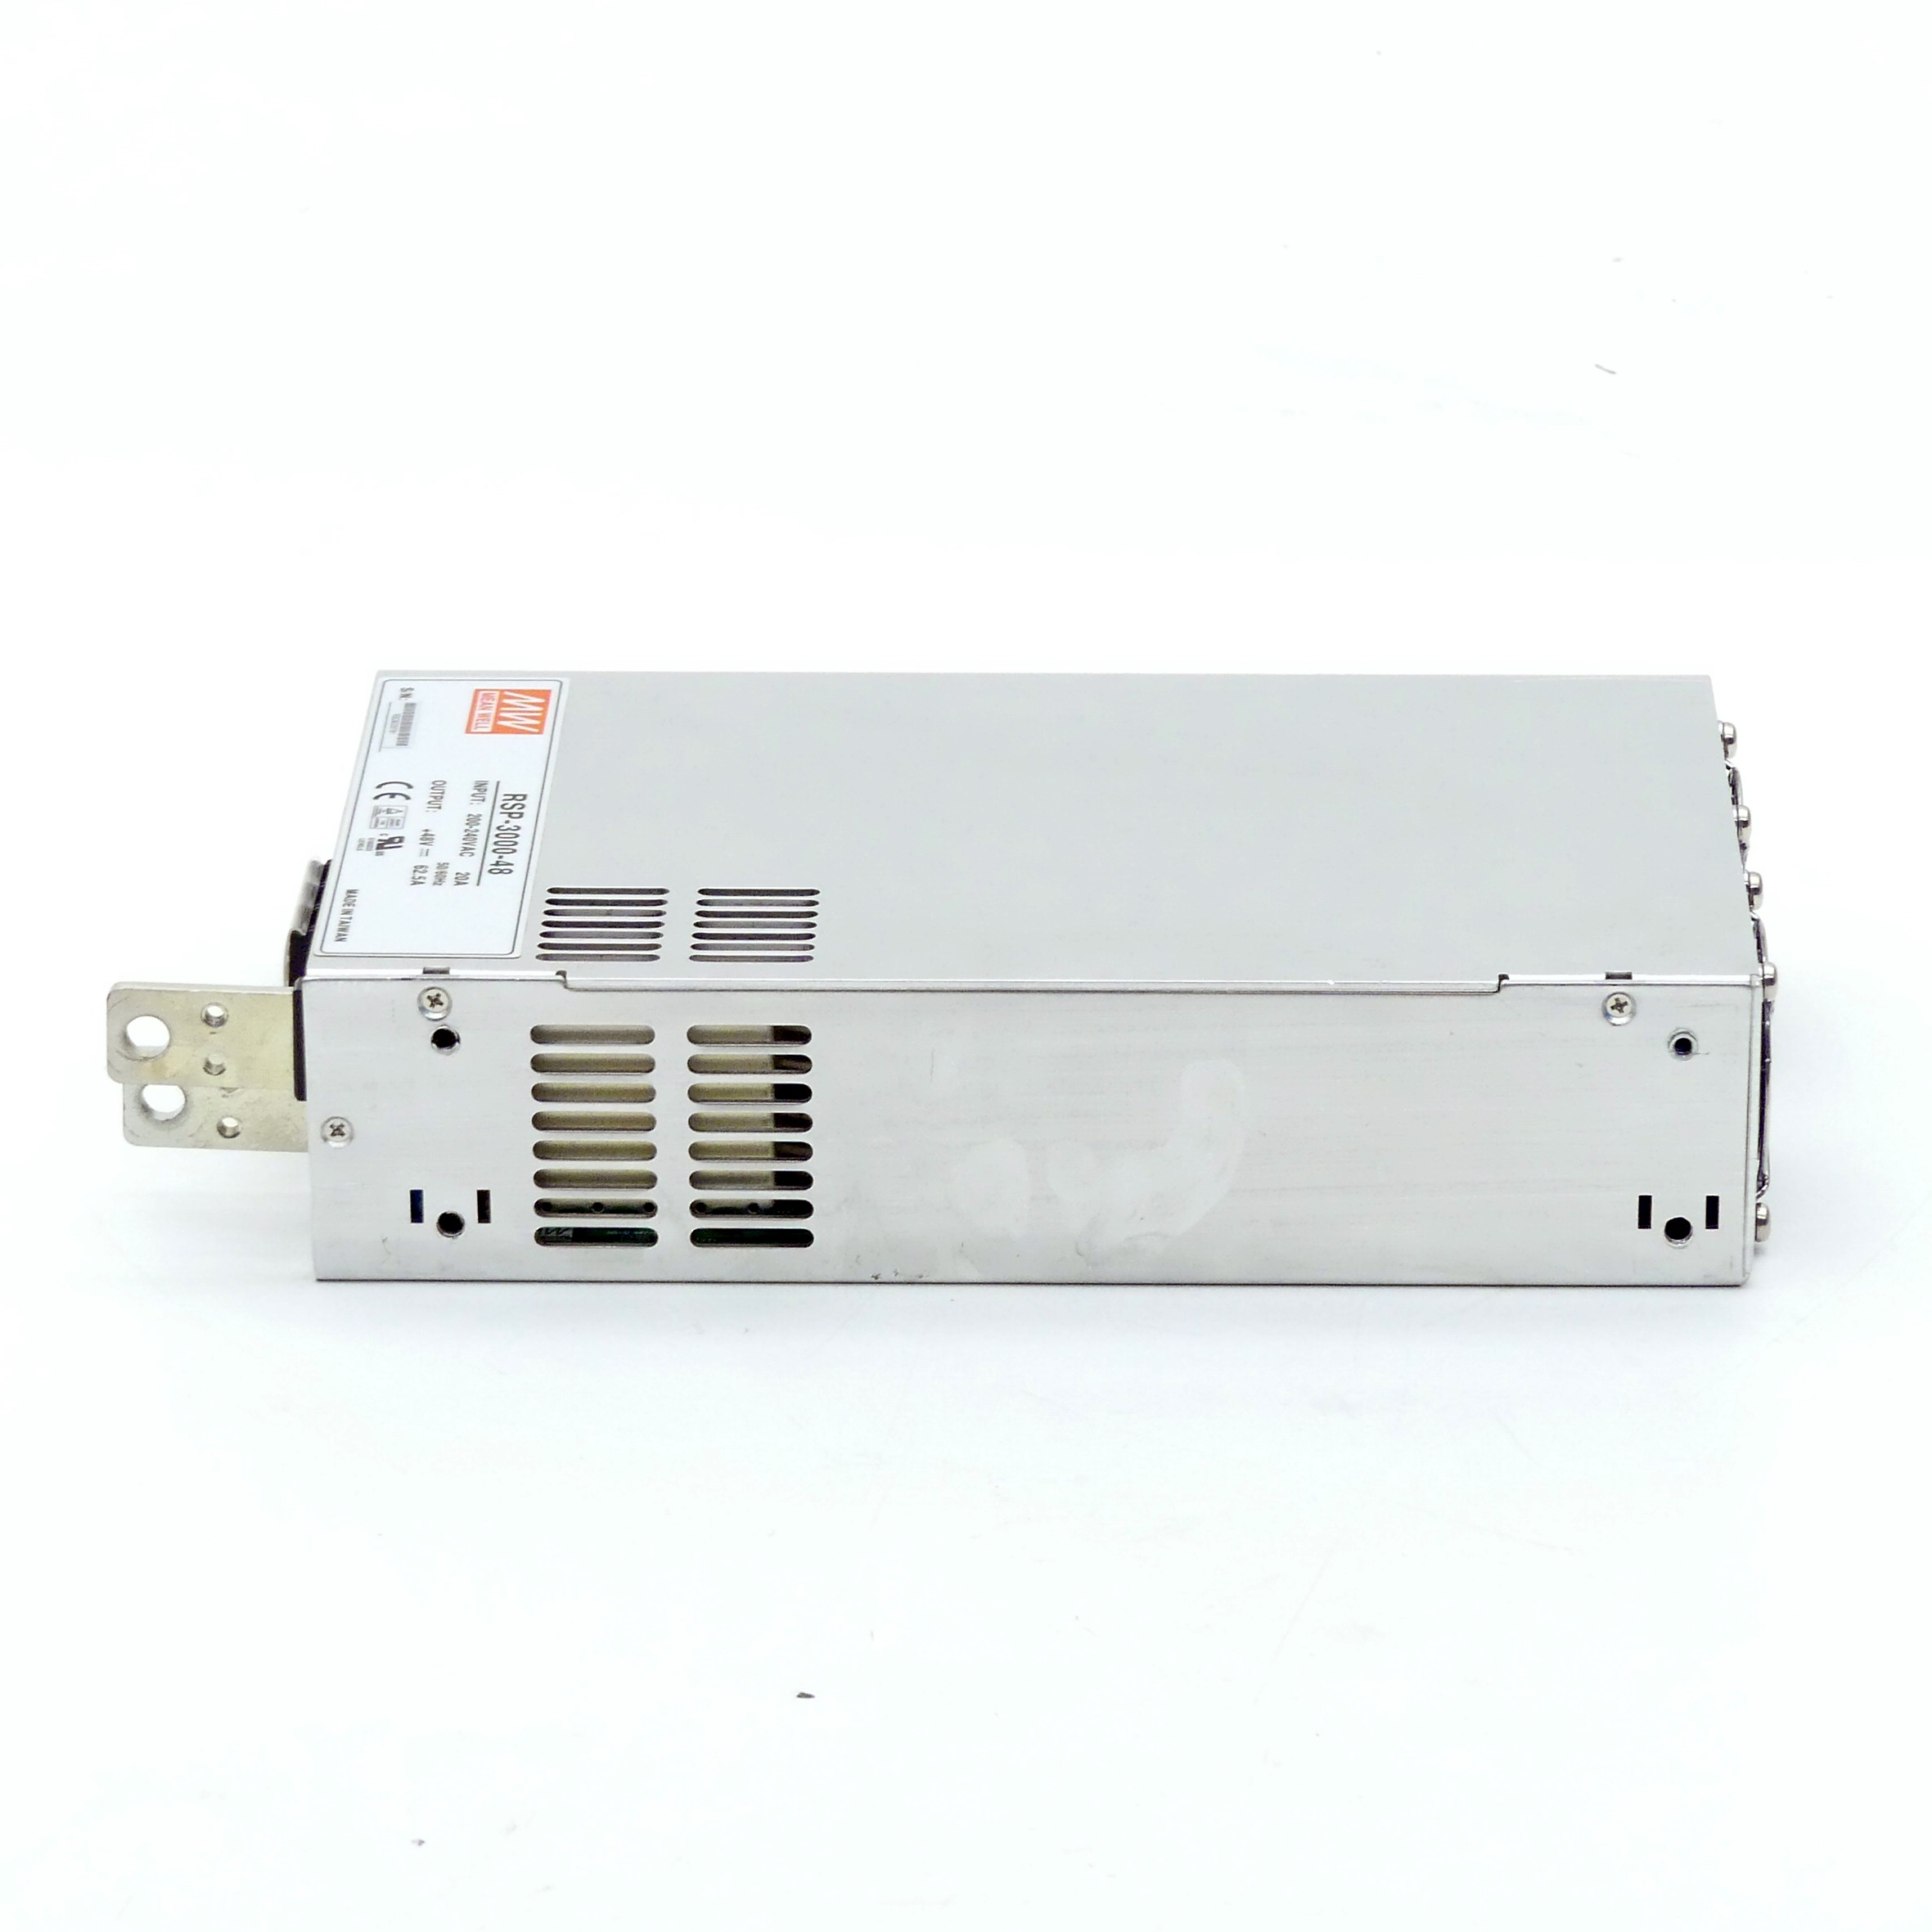 Switching power supply RSP-3000-48 